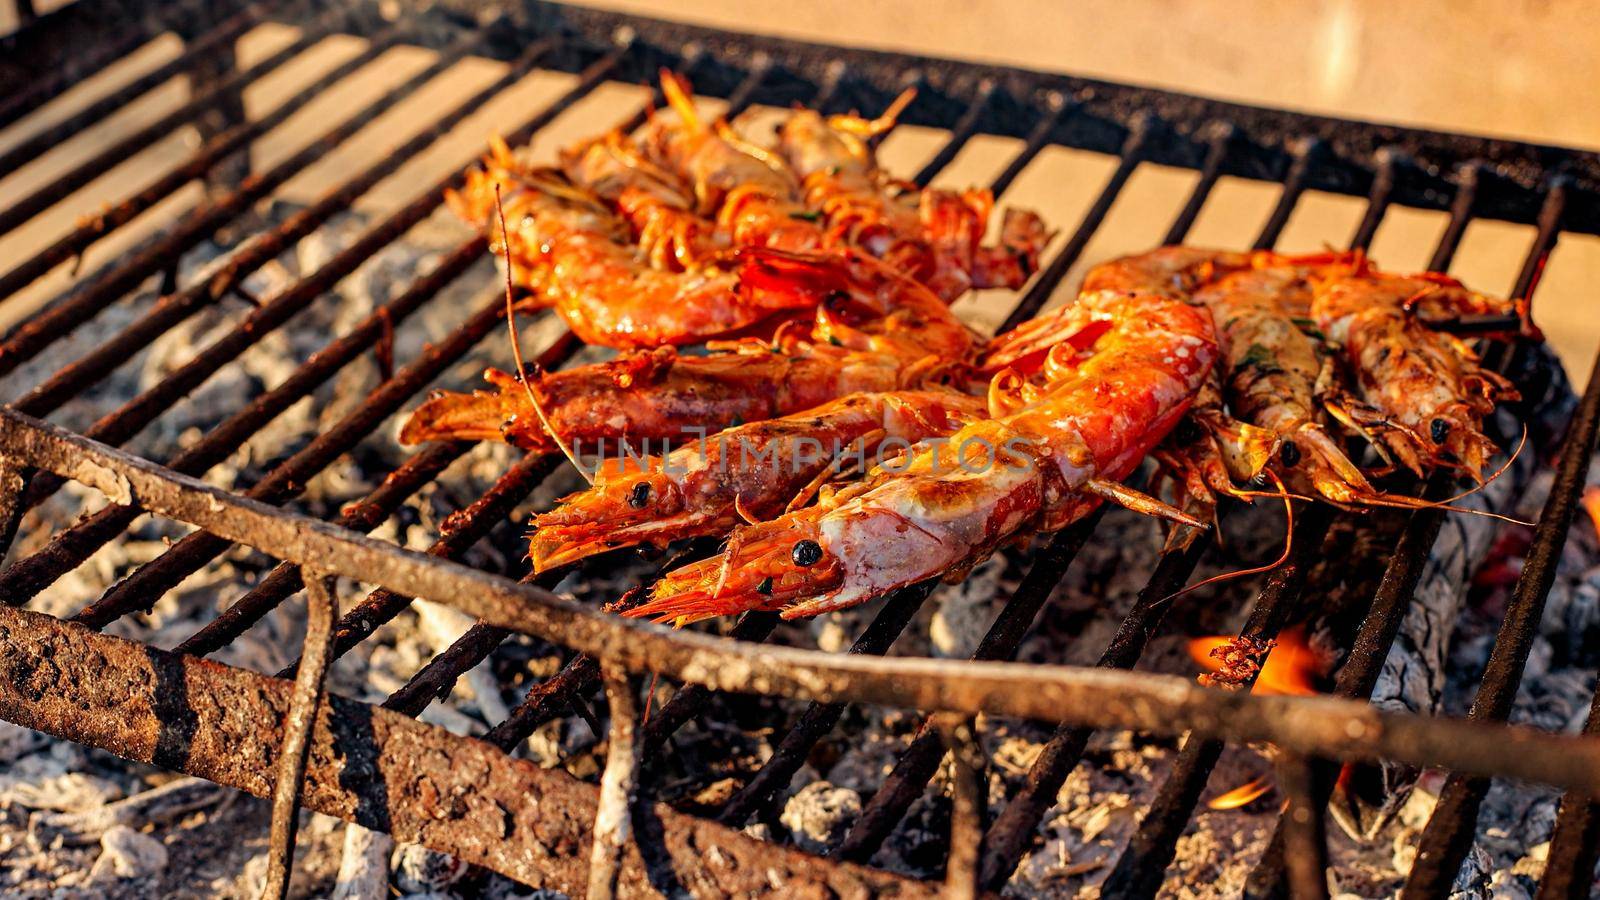 Grilled shrimp (Giant freshwater prawn) grilling with charcoal. Grilled shrimp on a grill with charcoal grill. Close-up of shrimps being fried in oil pan